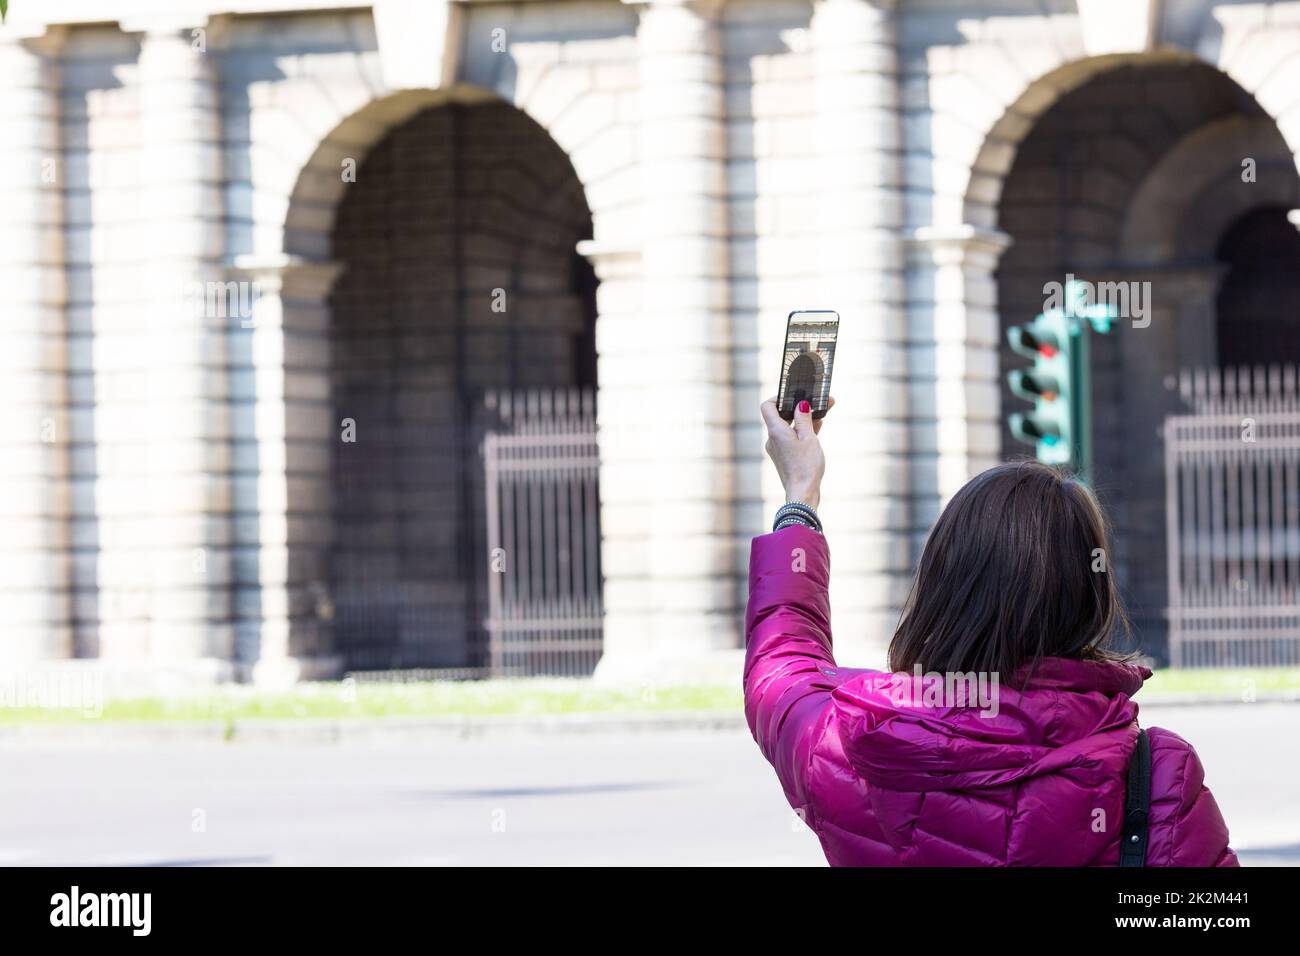 woman in a city taking photographs with transparent phone Stock Photo